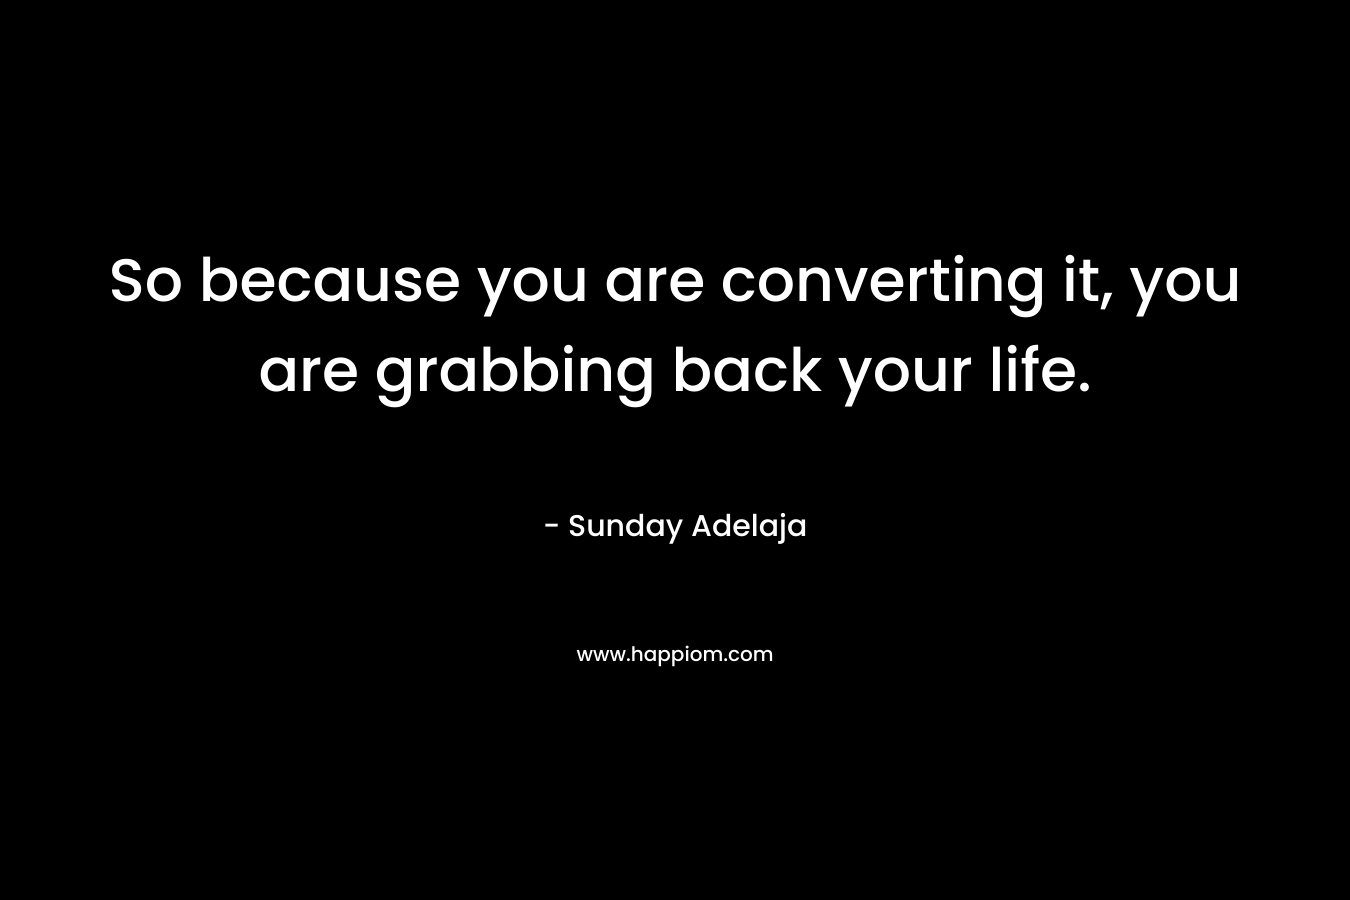 So because you are converting it, you are grabbing back your life.